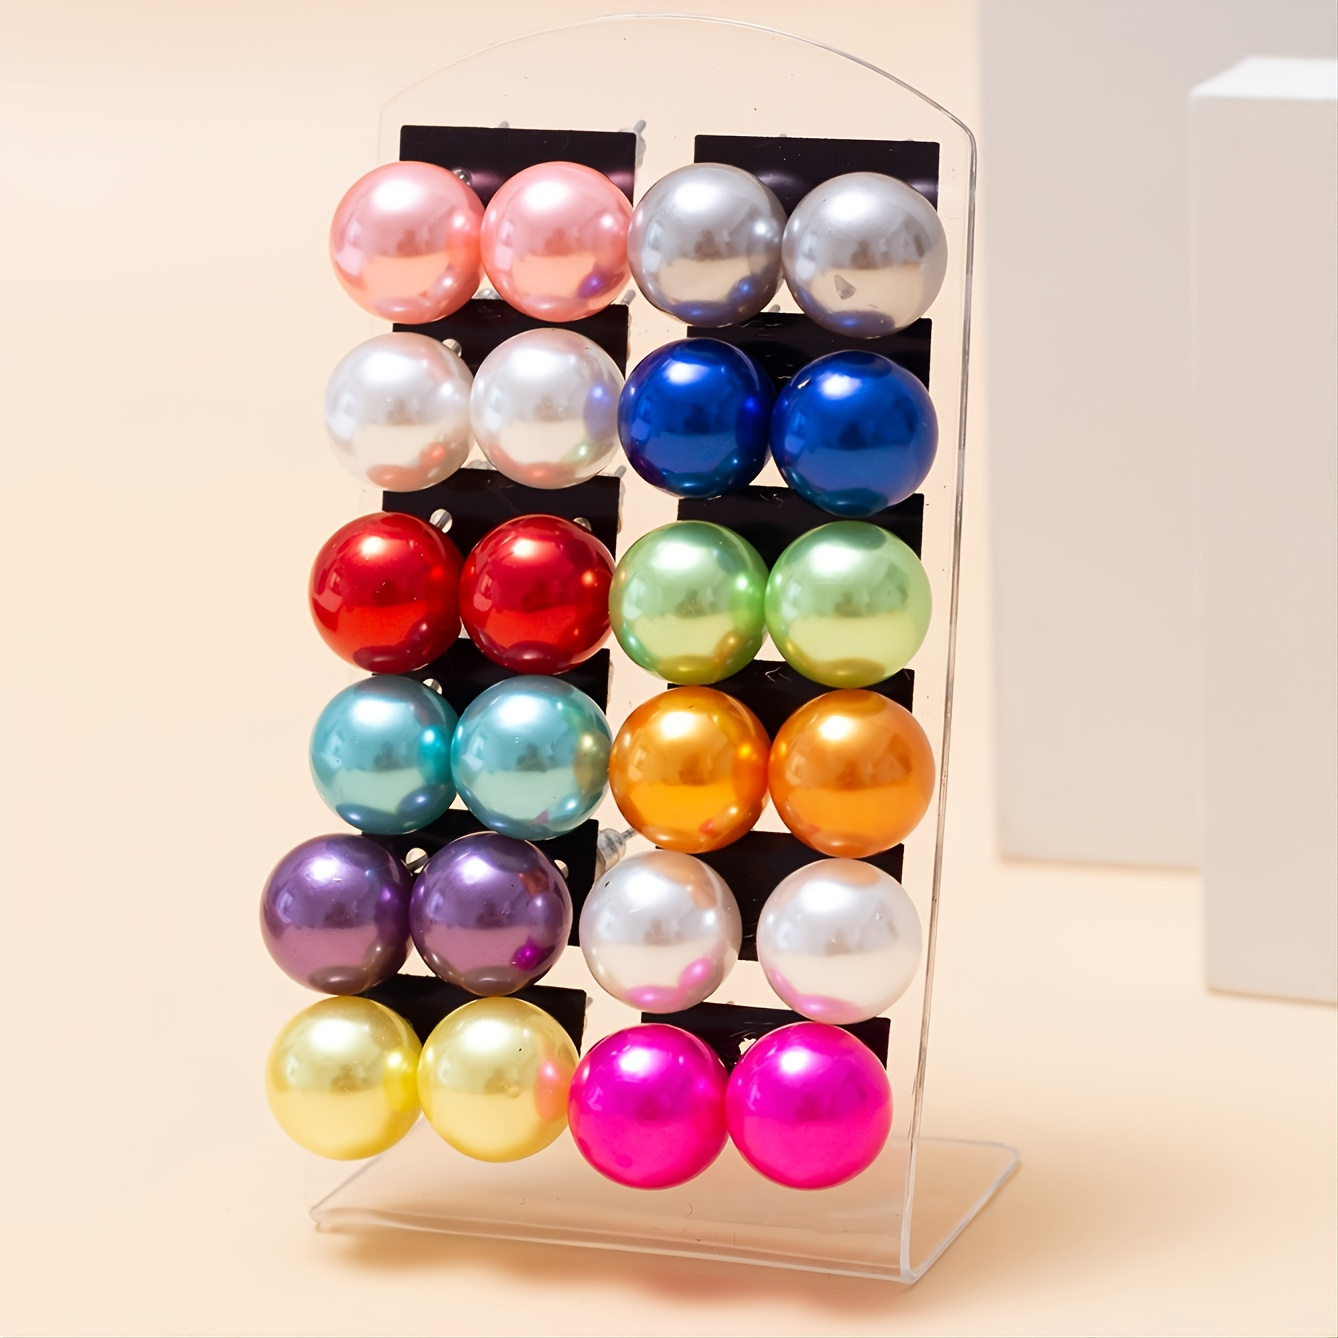 

12 Pairs Of Colorful Imitation Pearl Round Ball Stud Earrings Jewelry Gift For Men&women With 6 8 10 12mm